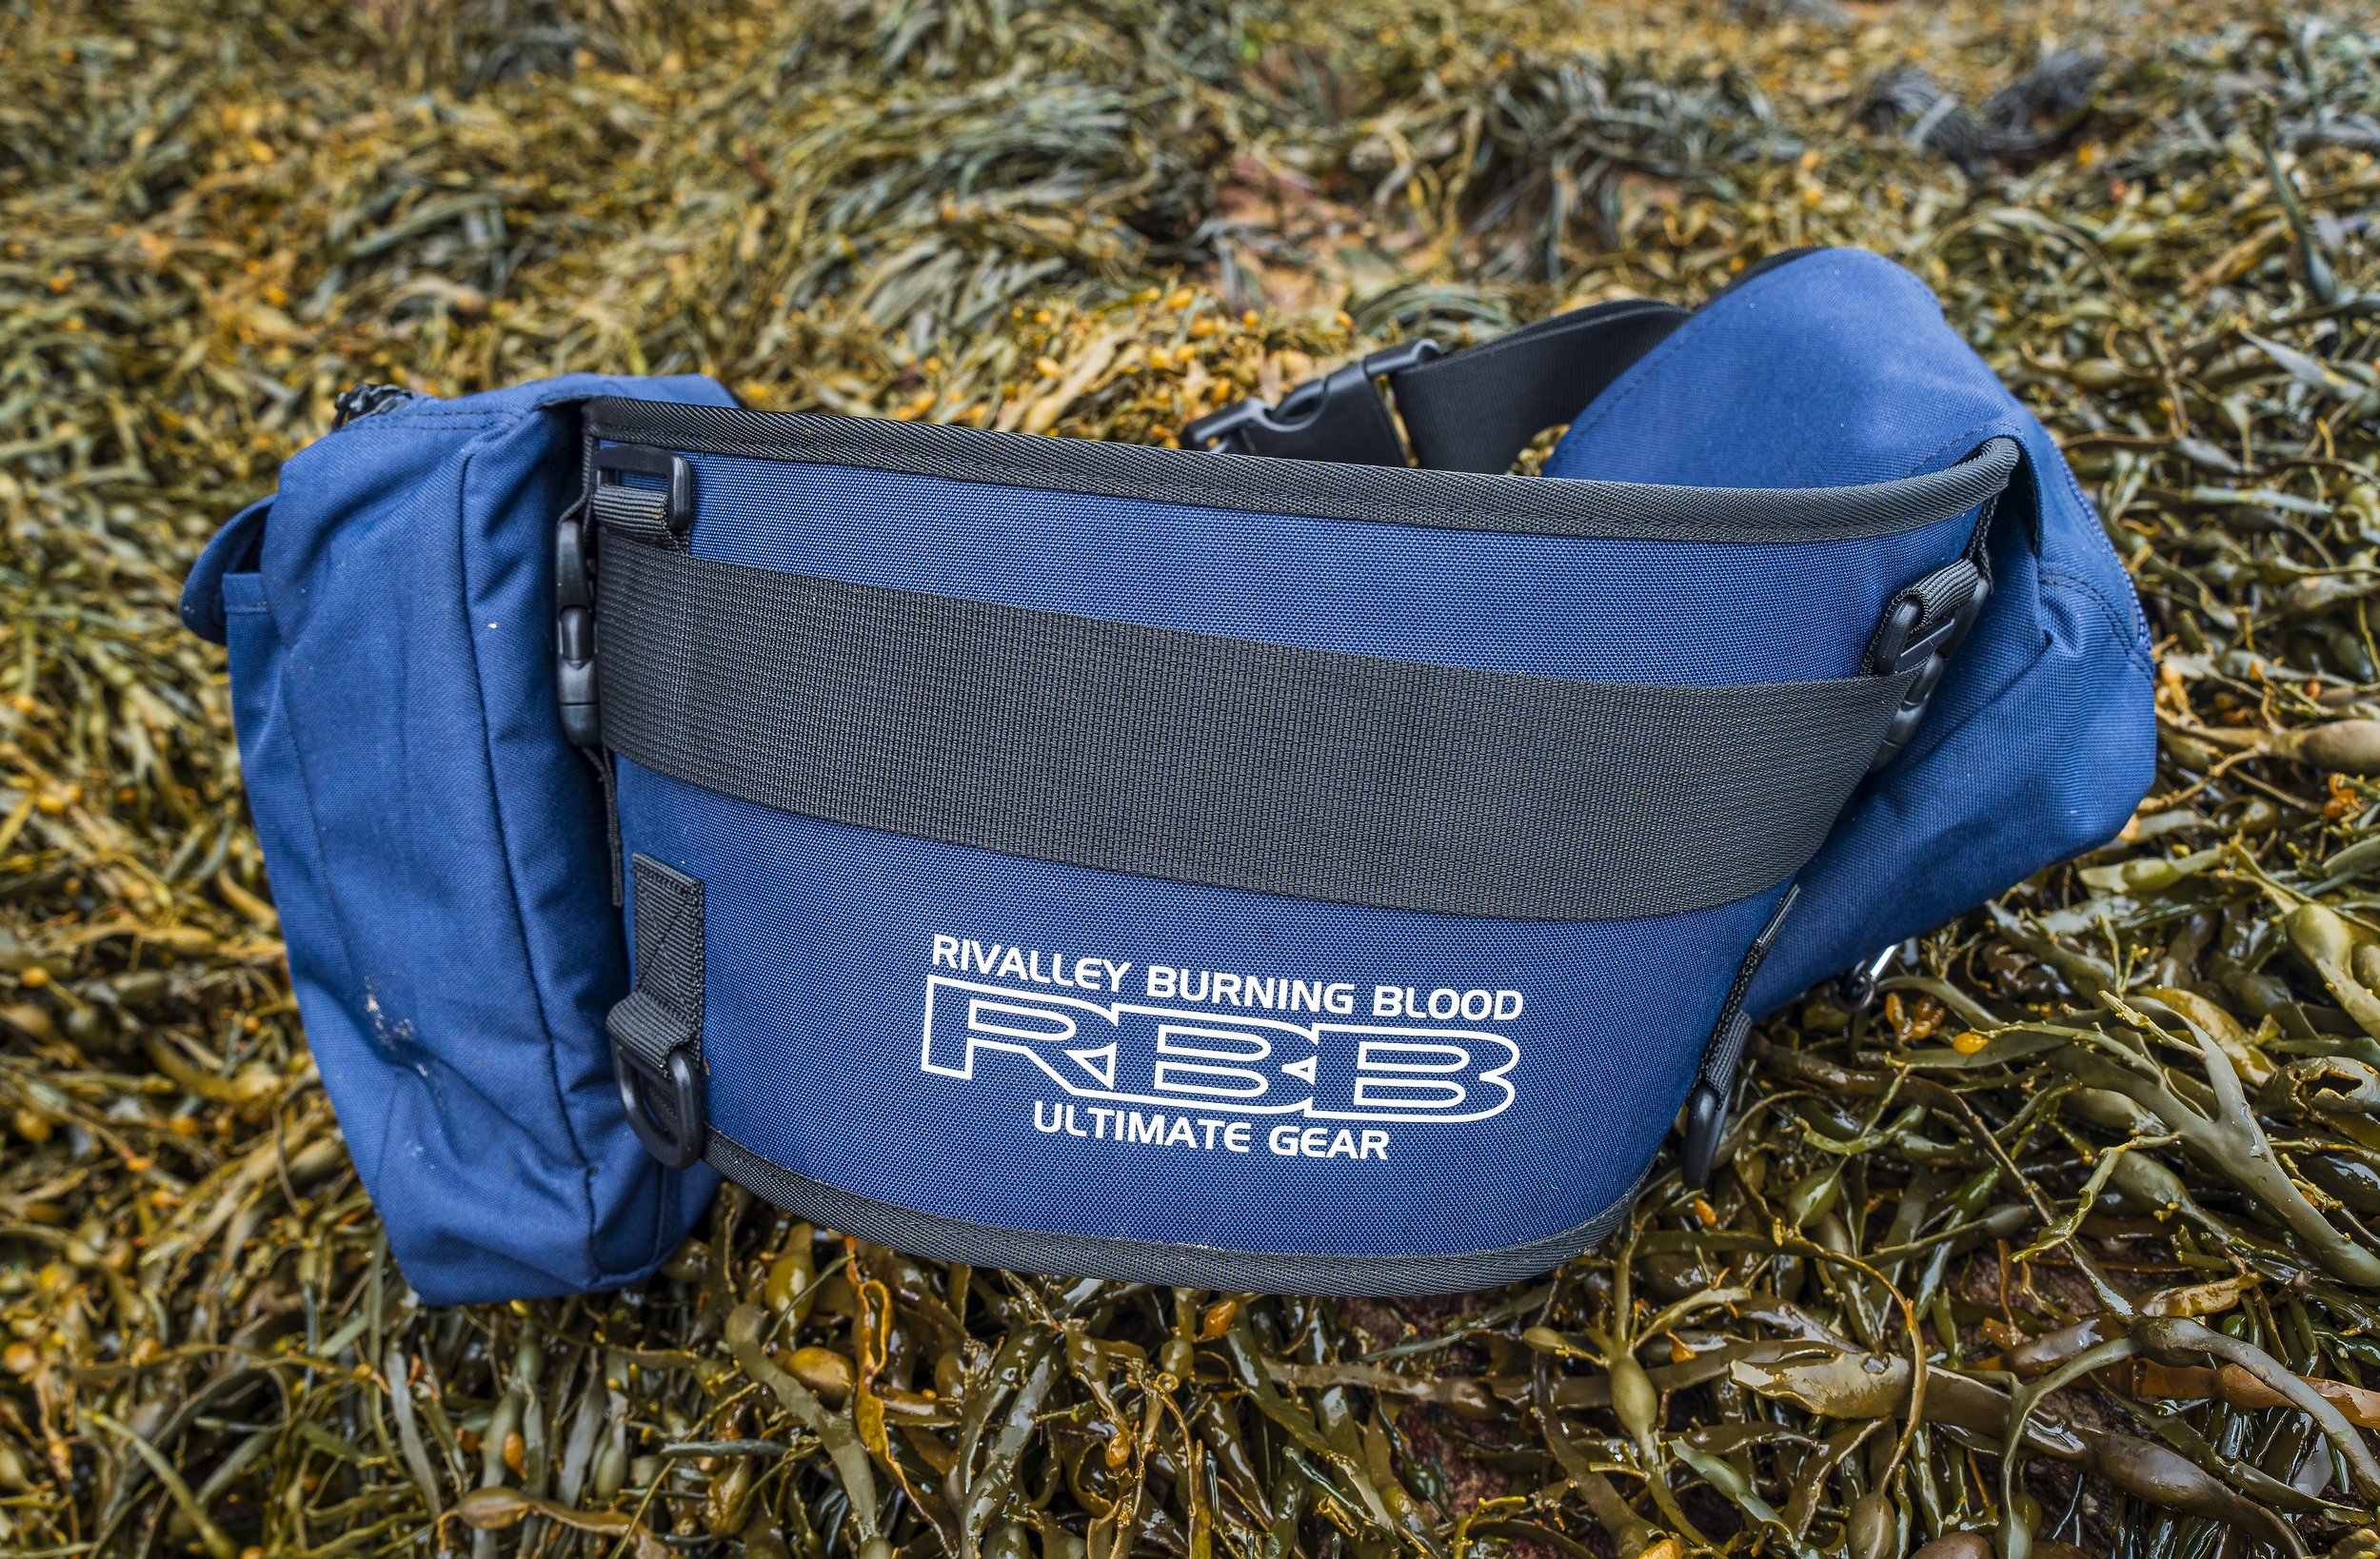 RBB Surf Supporter II lure bag review - around £95 here in the UK